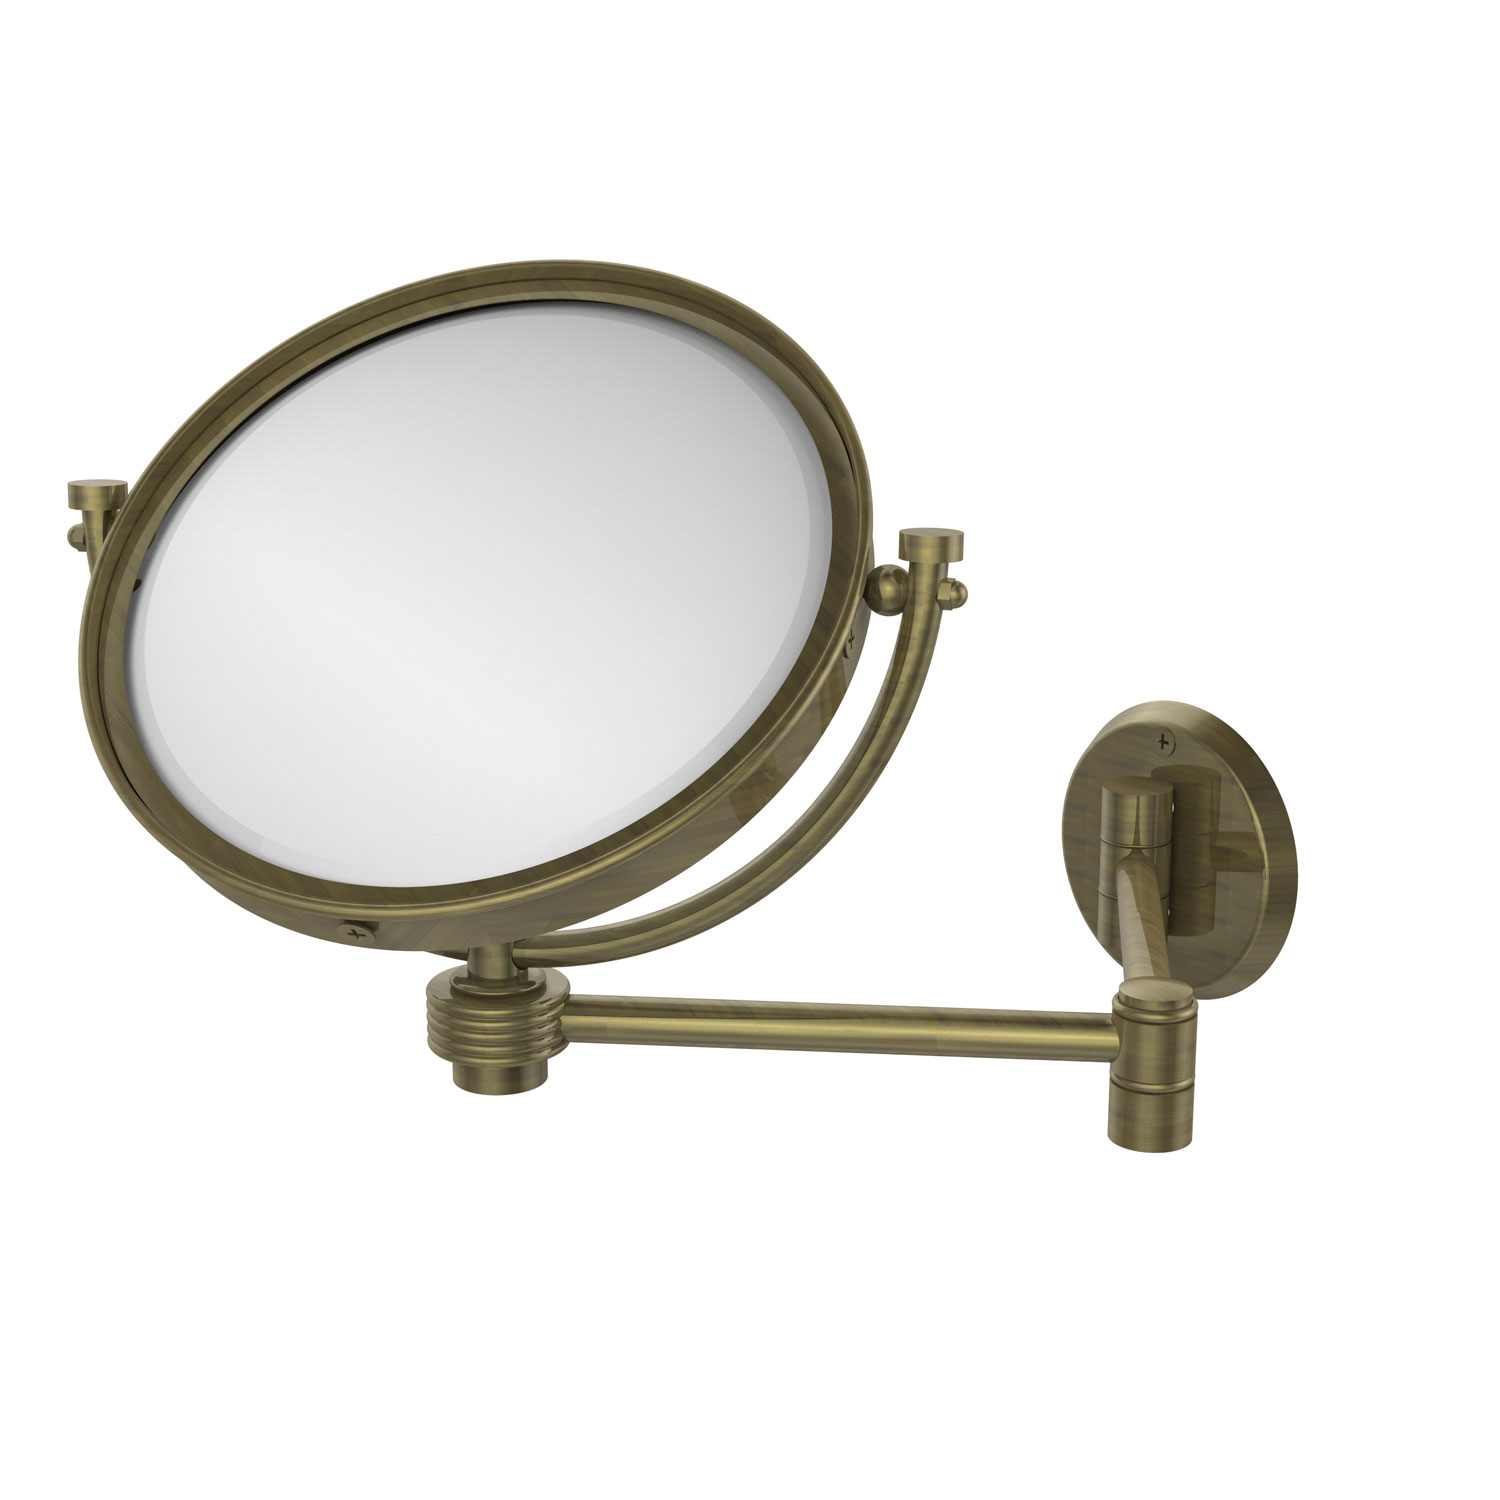 8 Inch Wall Mounted Extending Make-Up Mirror 2X Magnification With Groovy Accent, Antique Brass